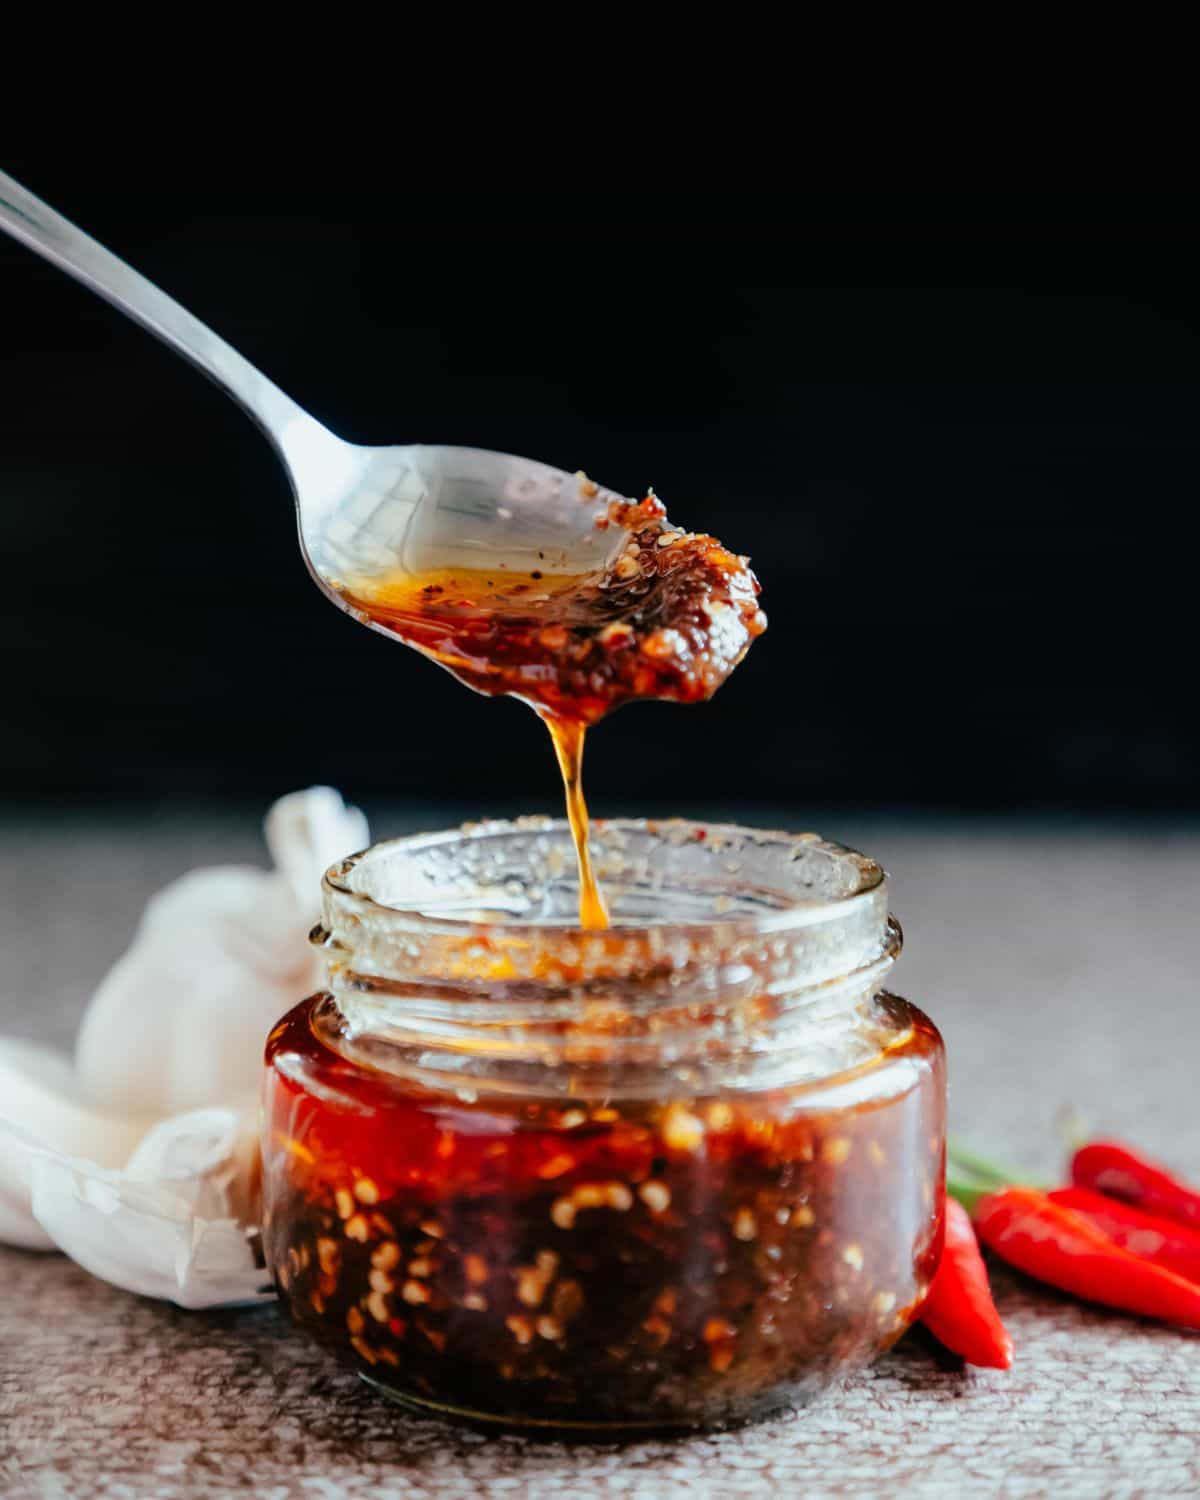 Chili sauce in a glass jar with a metal spoon.